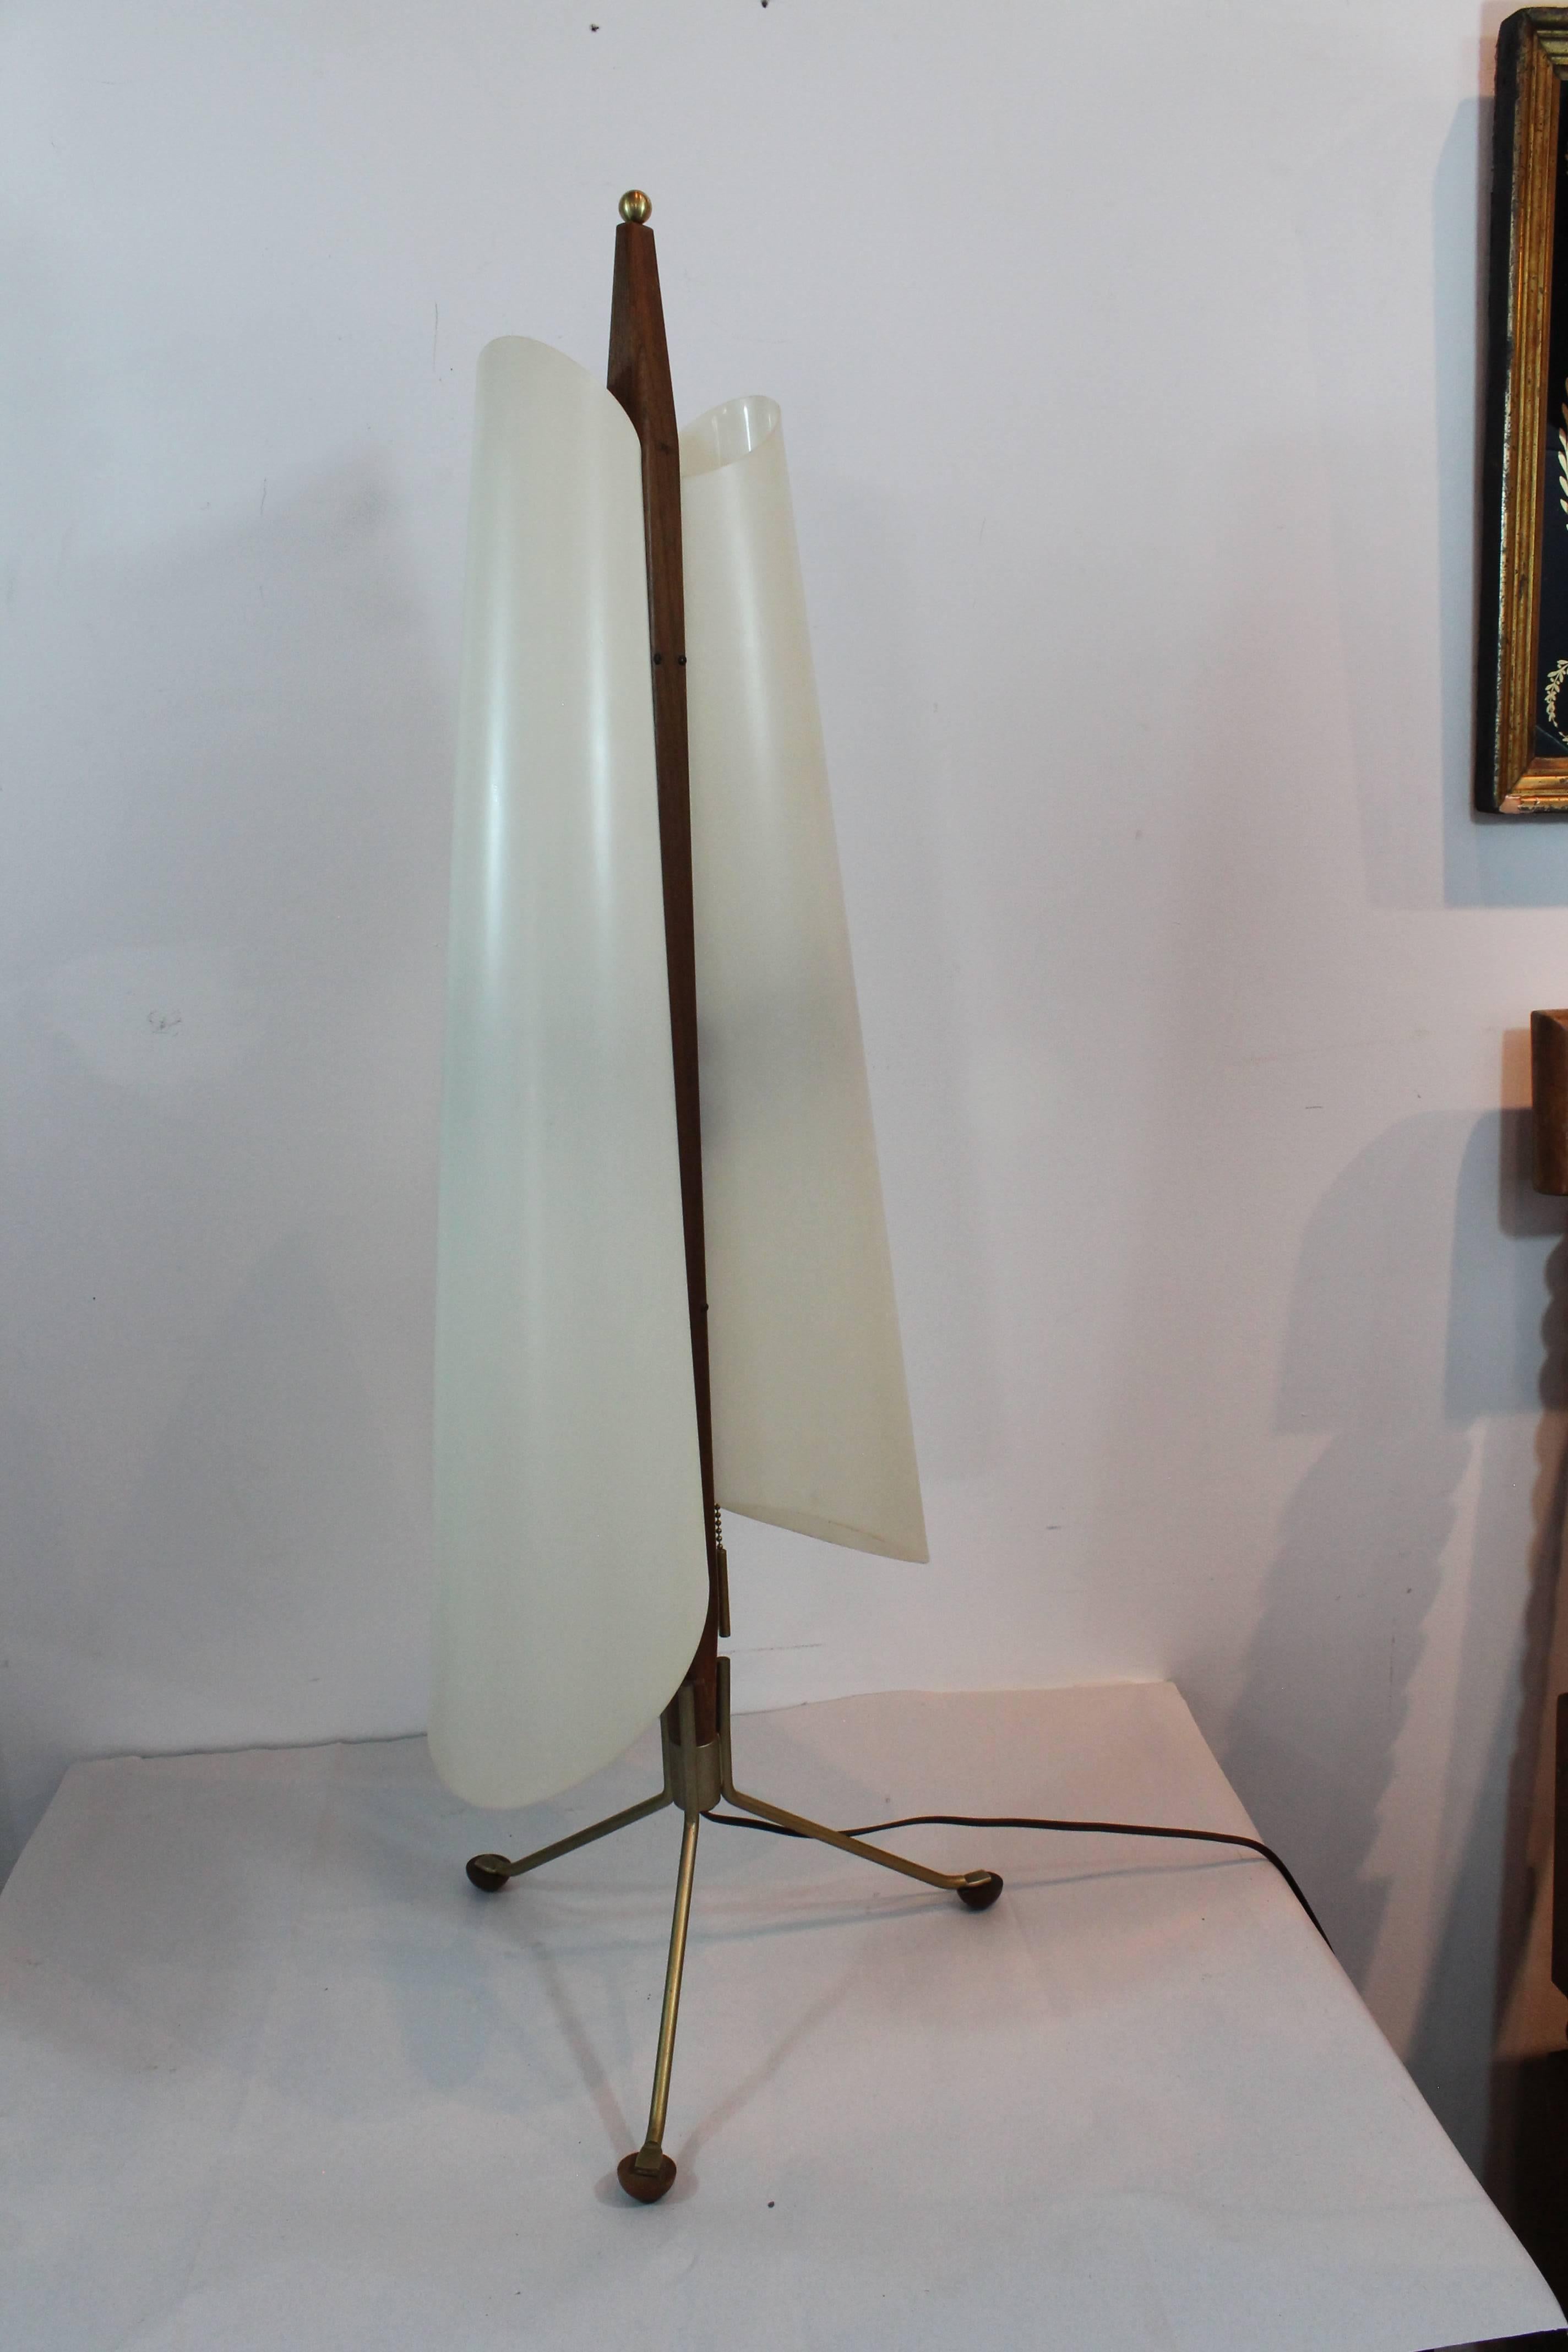 Elegantly proportioned large-scale Mid-Century Modernist tripod based table lamps.
Exceptional sculptural Minimalist form featuring walnut and brass details with a pair of plastic side shade forms concealing an up and a down bulb on each